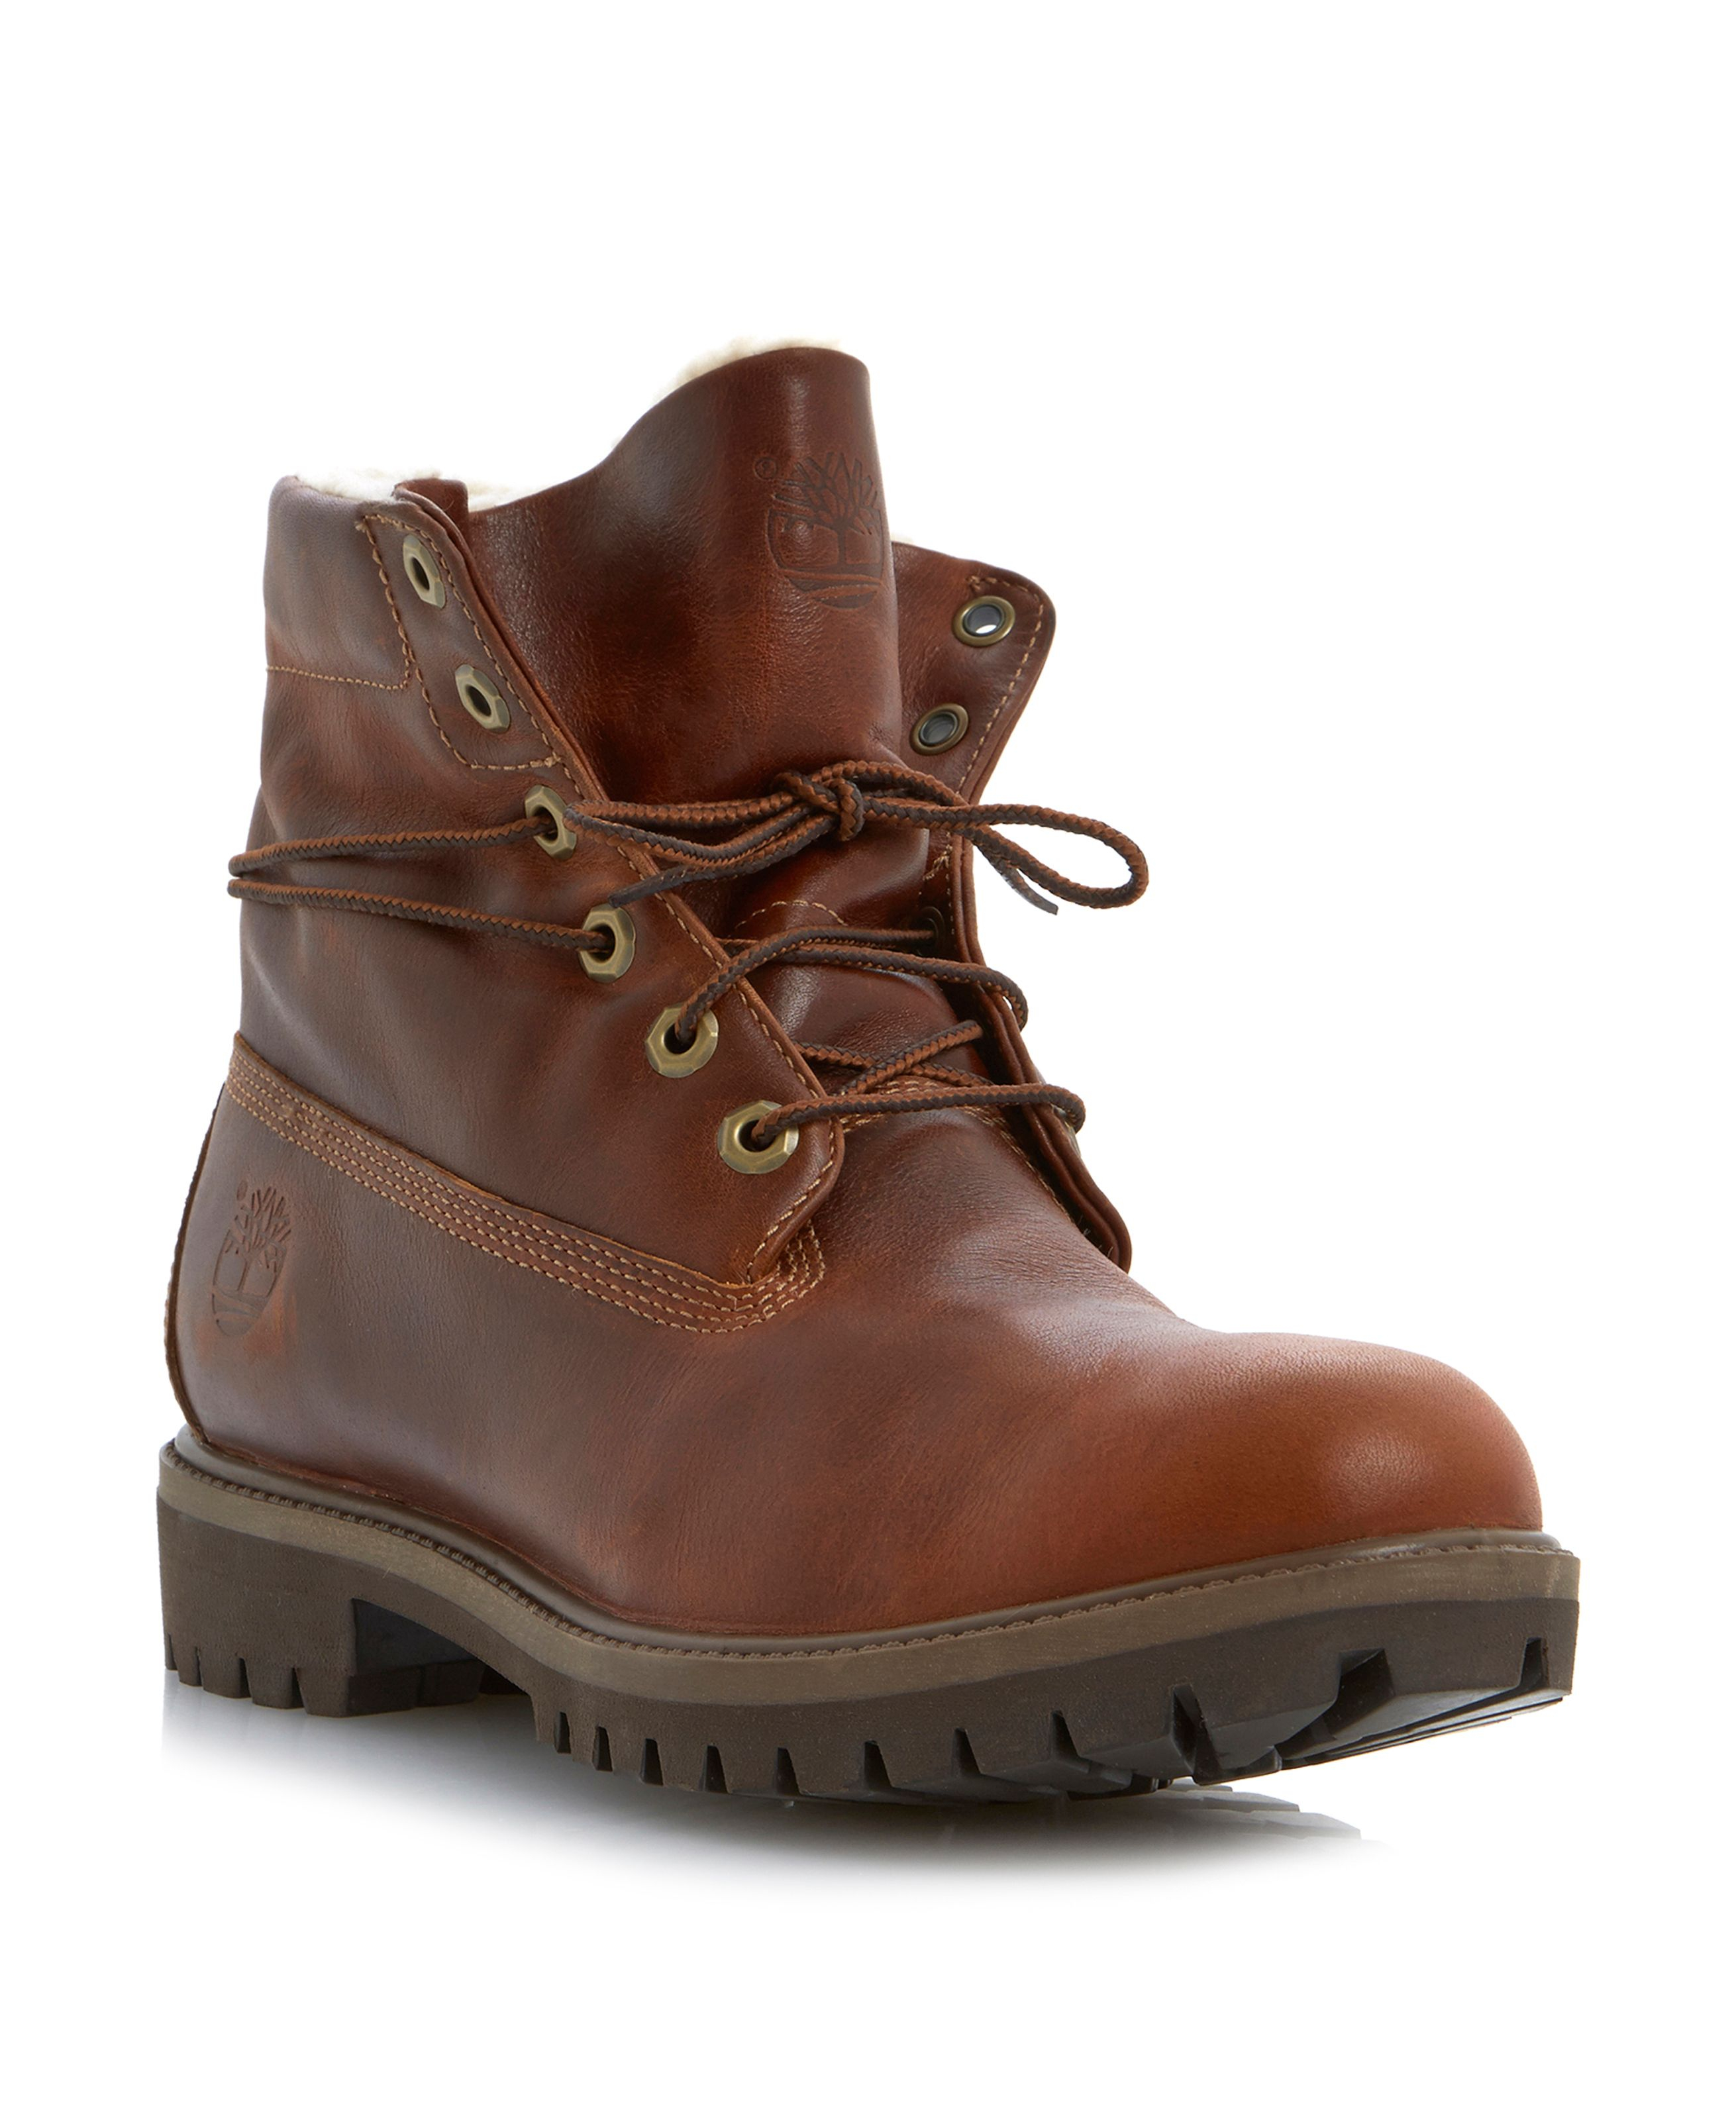 Timberland Leather Heavy Lace Up Boots in Brown for Men - Lyst